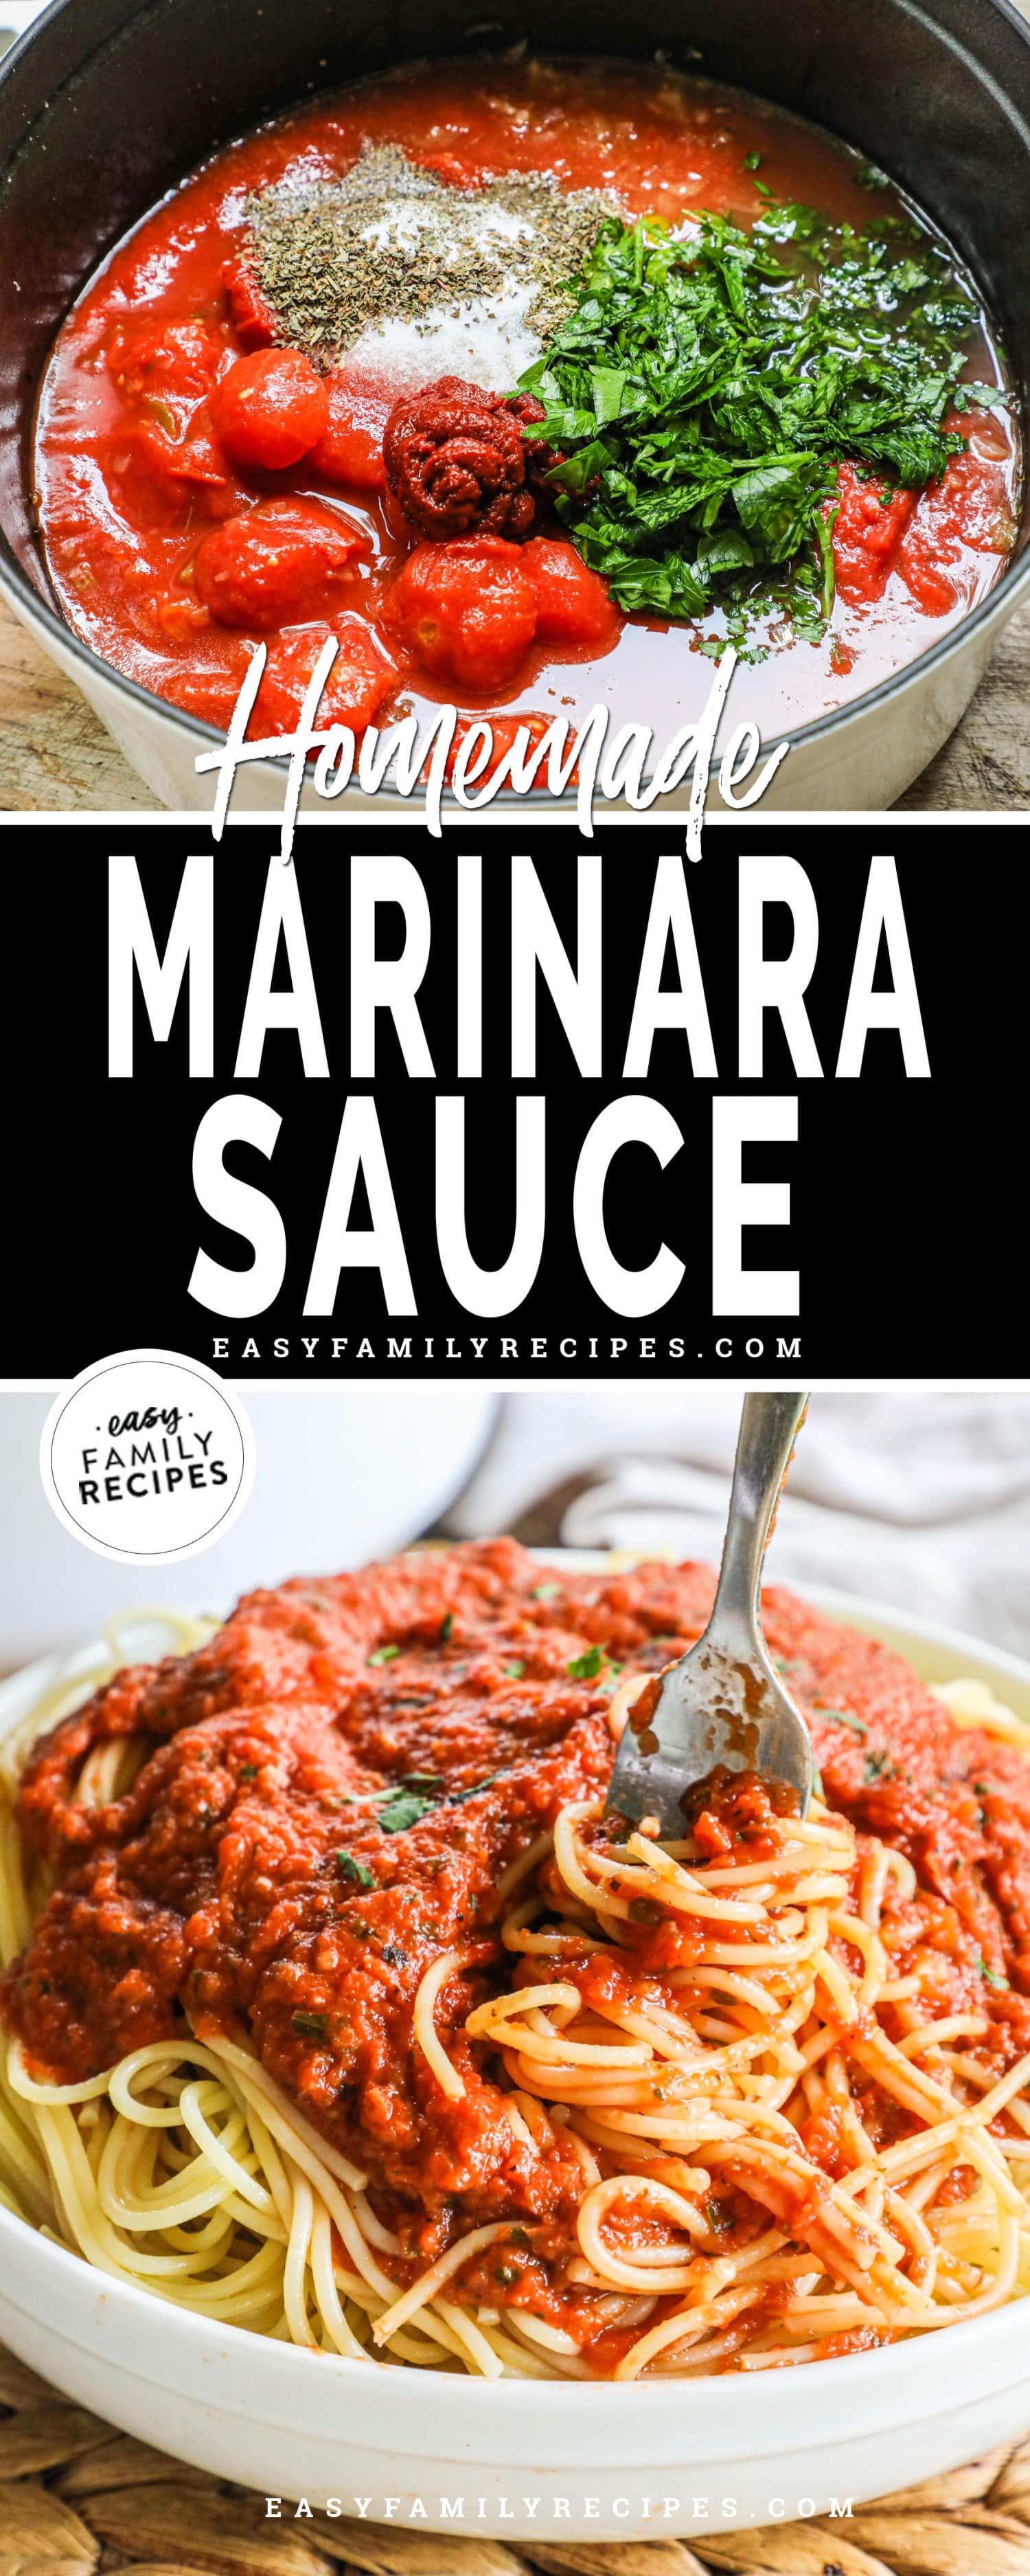 two images of marinara sauce, one with all ingredients in a pot and the second with sauce served over spaghetti.